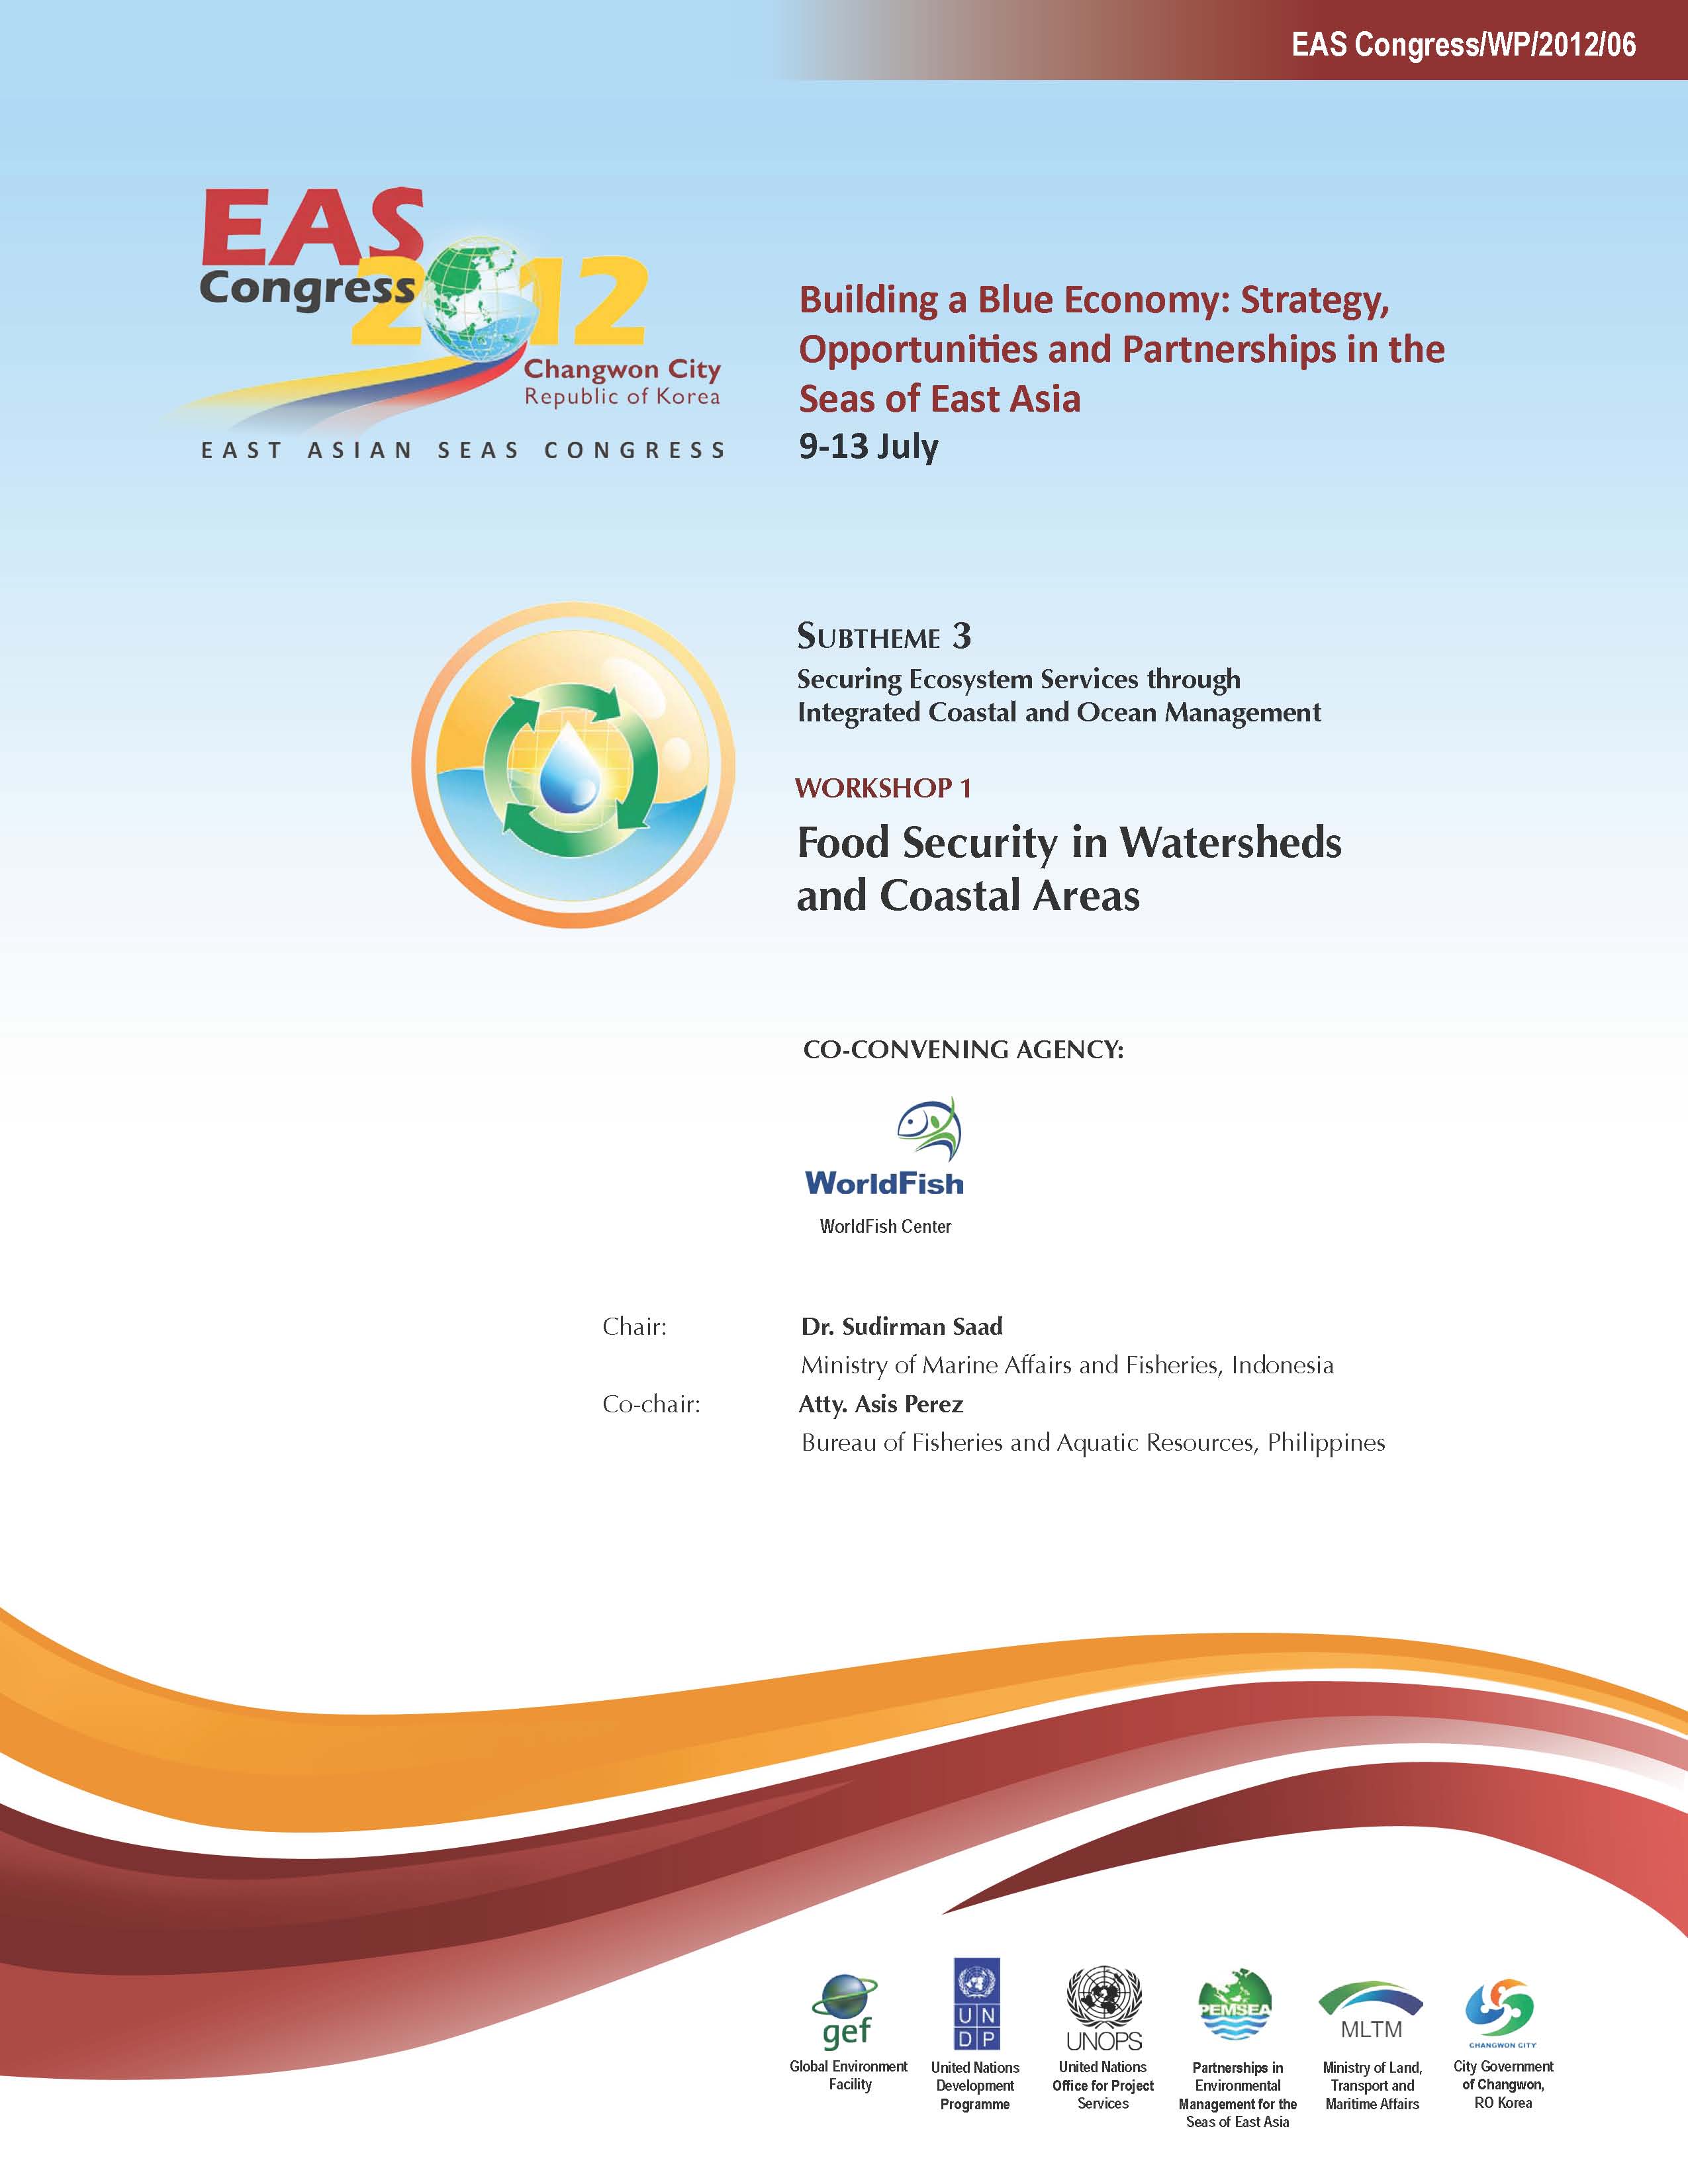 Proceedings of the Workshop on Food Security in Watersheds and Coastal Areas